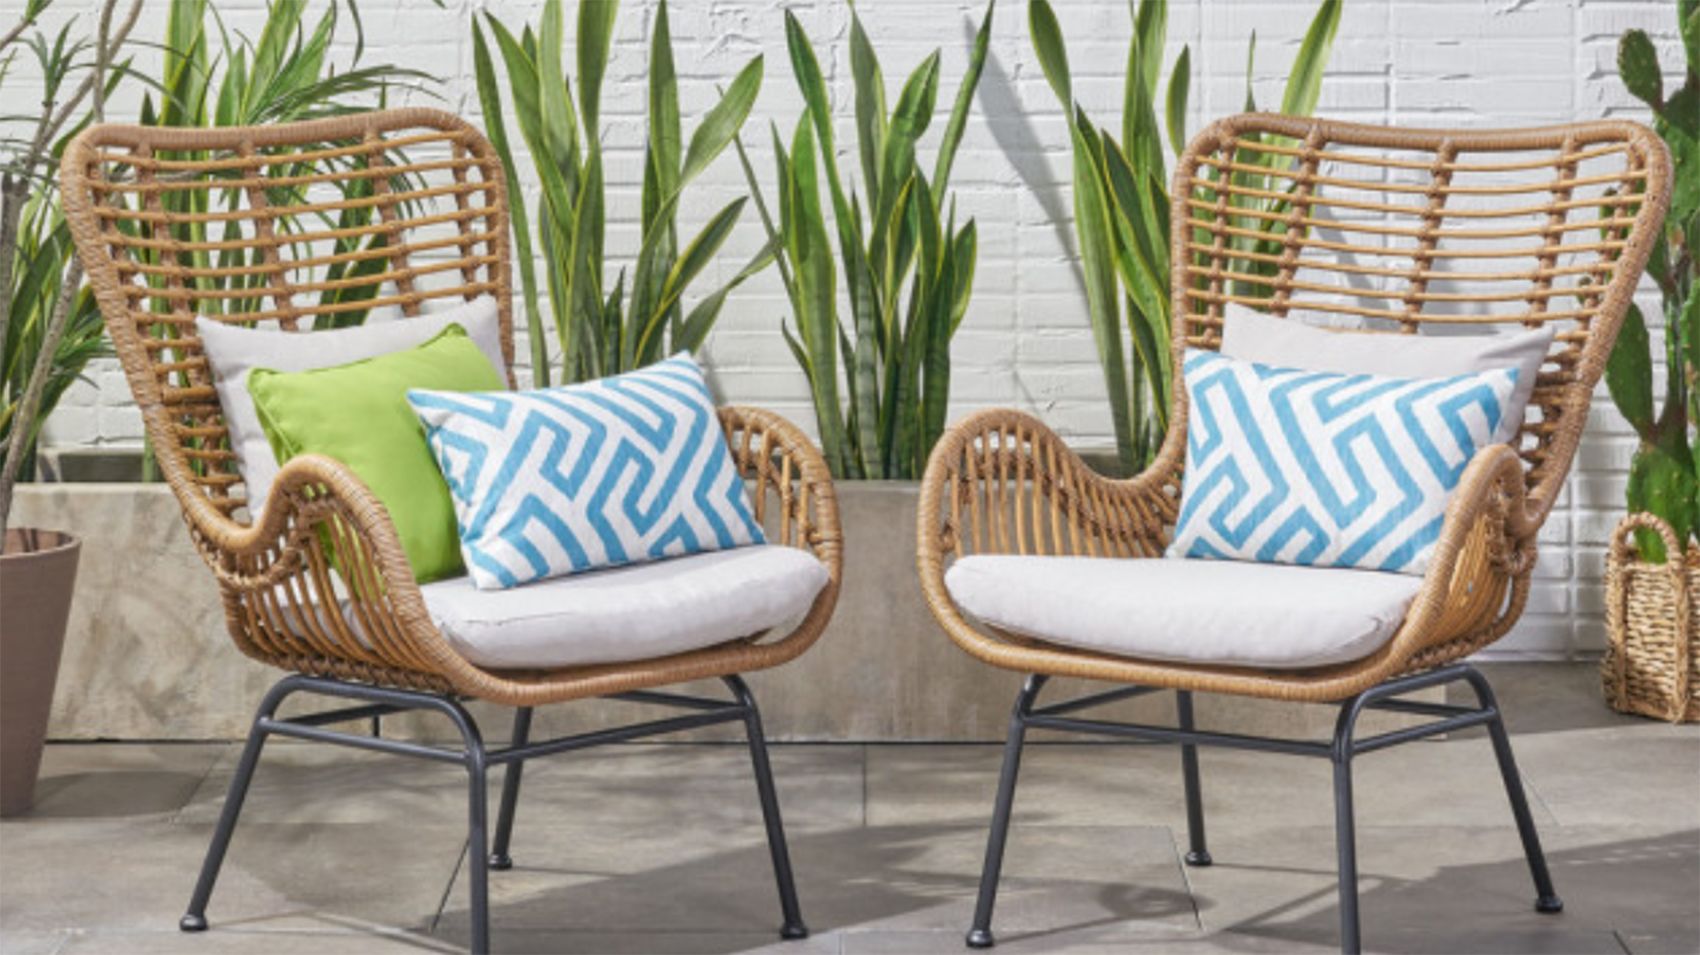 Outsunny 7-Piece Rattan Outdoor Furniture-Set - Creamy White (860-020) for  sale online